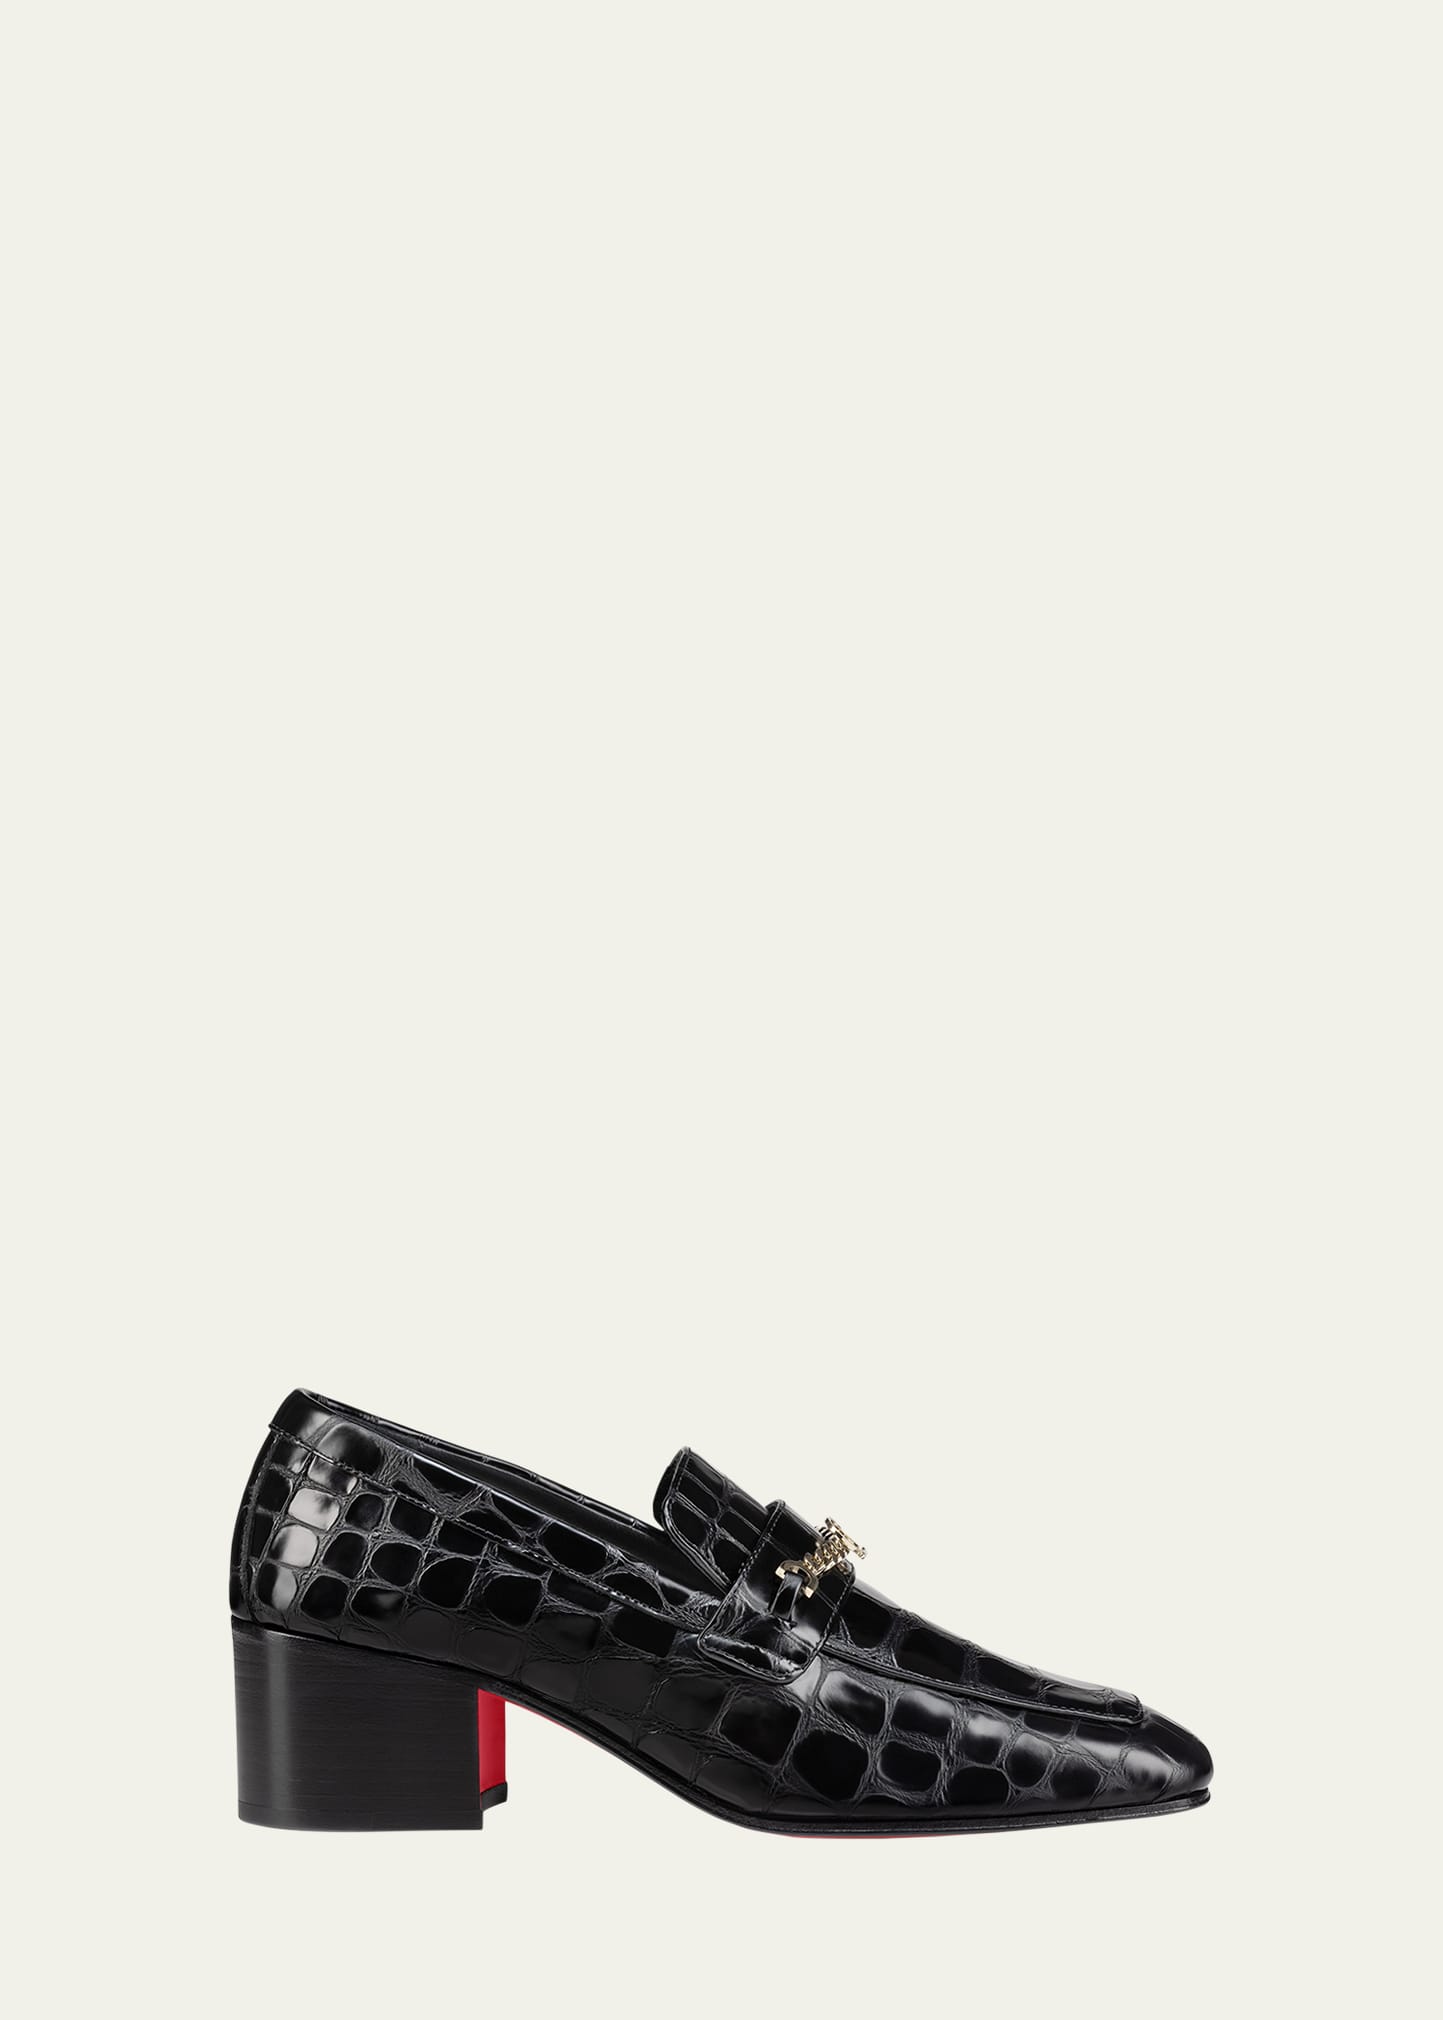 MJ Croco Chain Red Sole Heeled Loafers